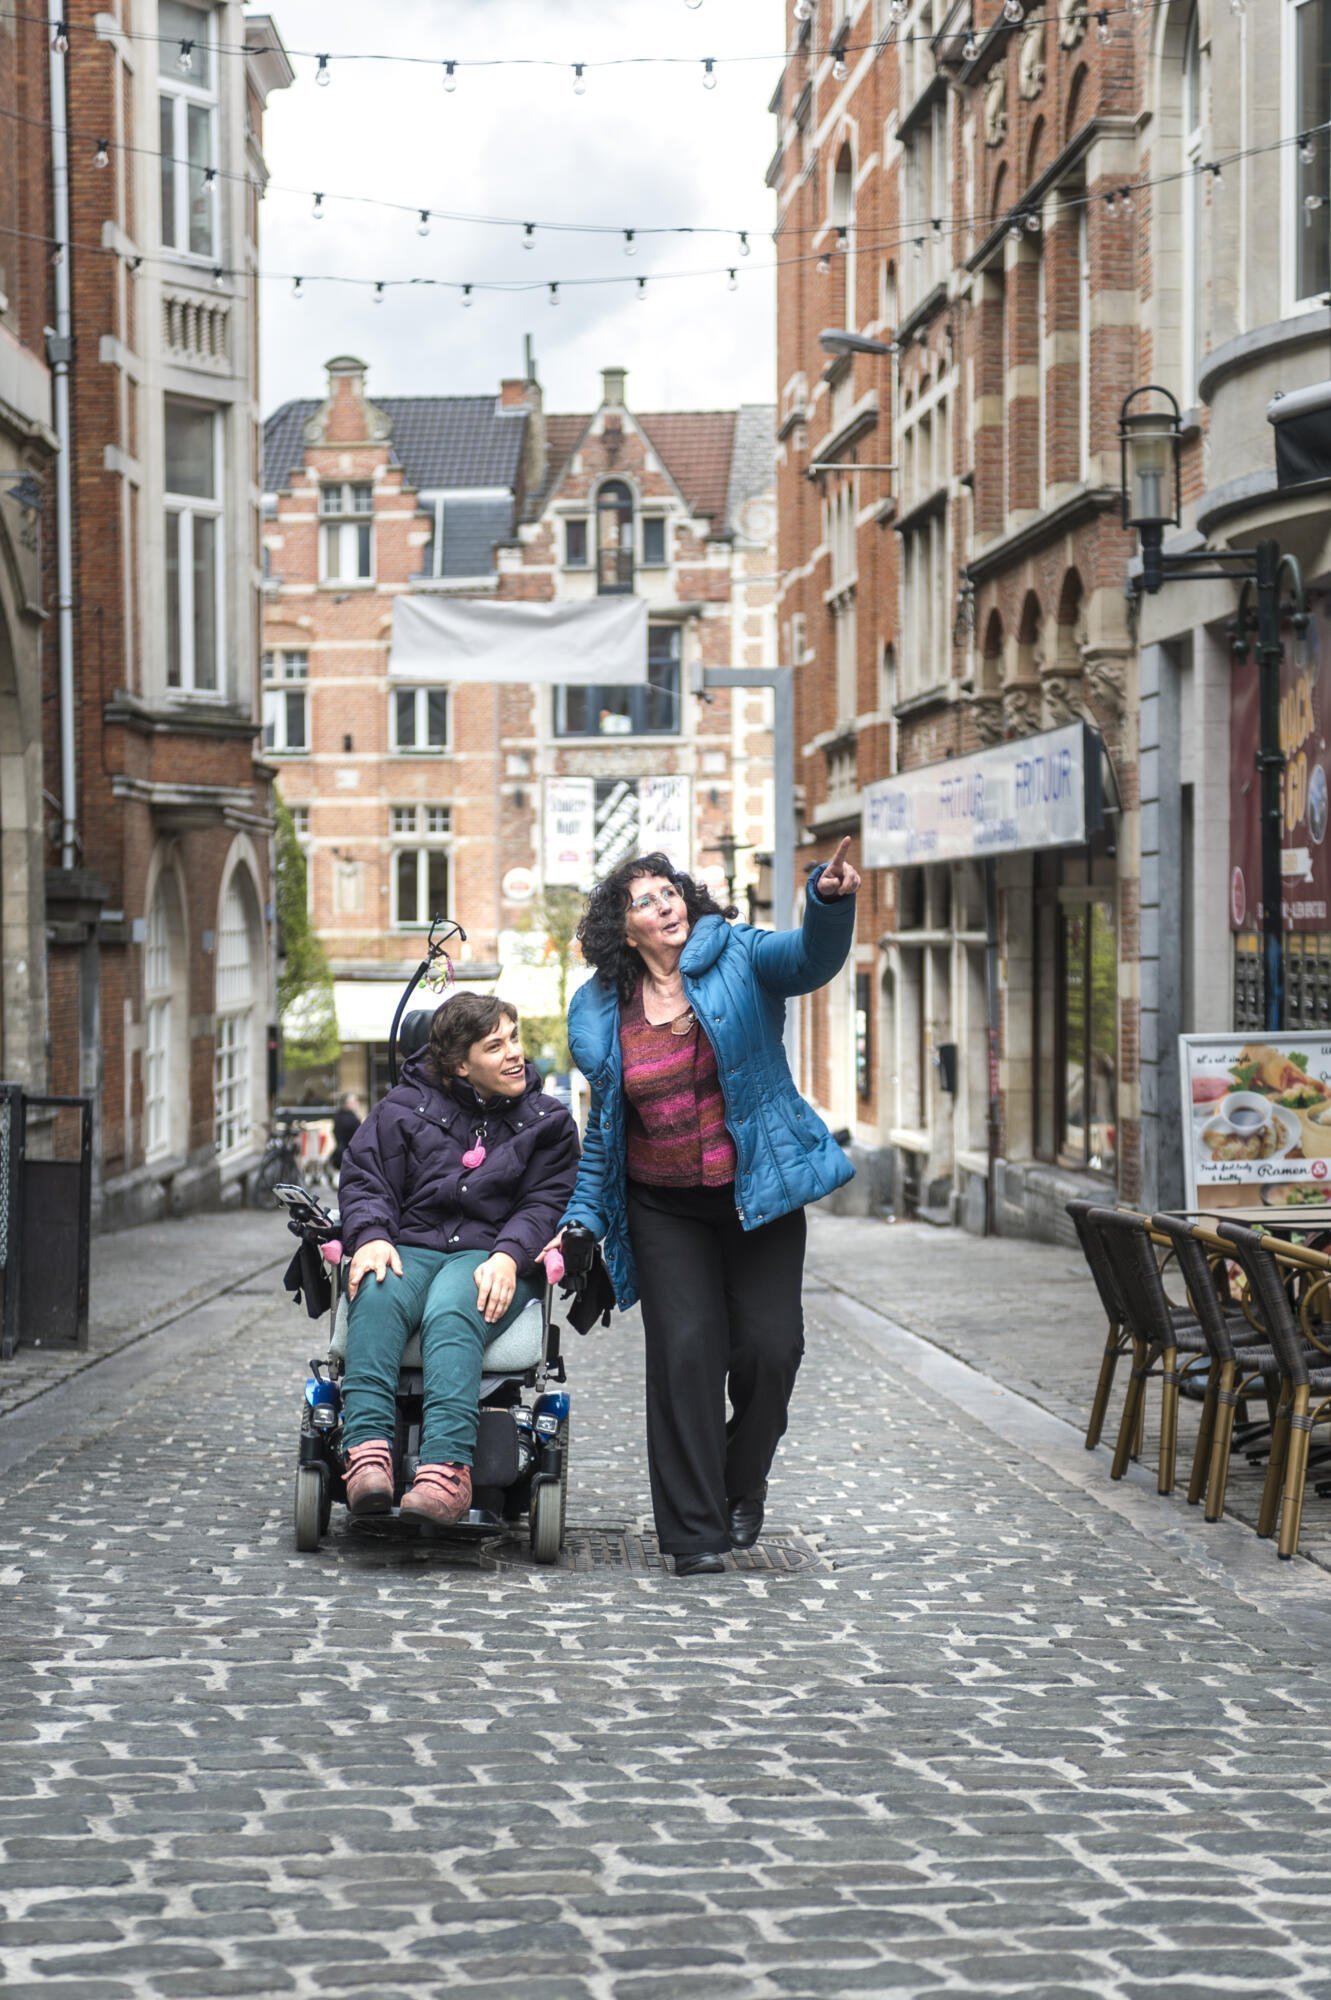 Leuven is the ‘Best Open-Minded Destination in Europe’